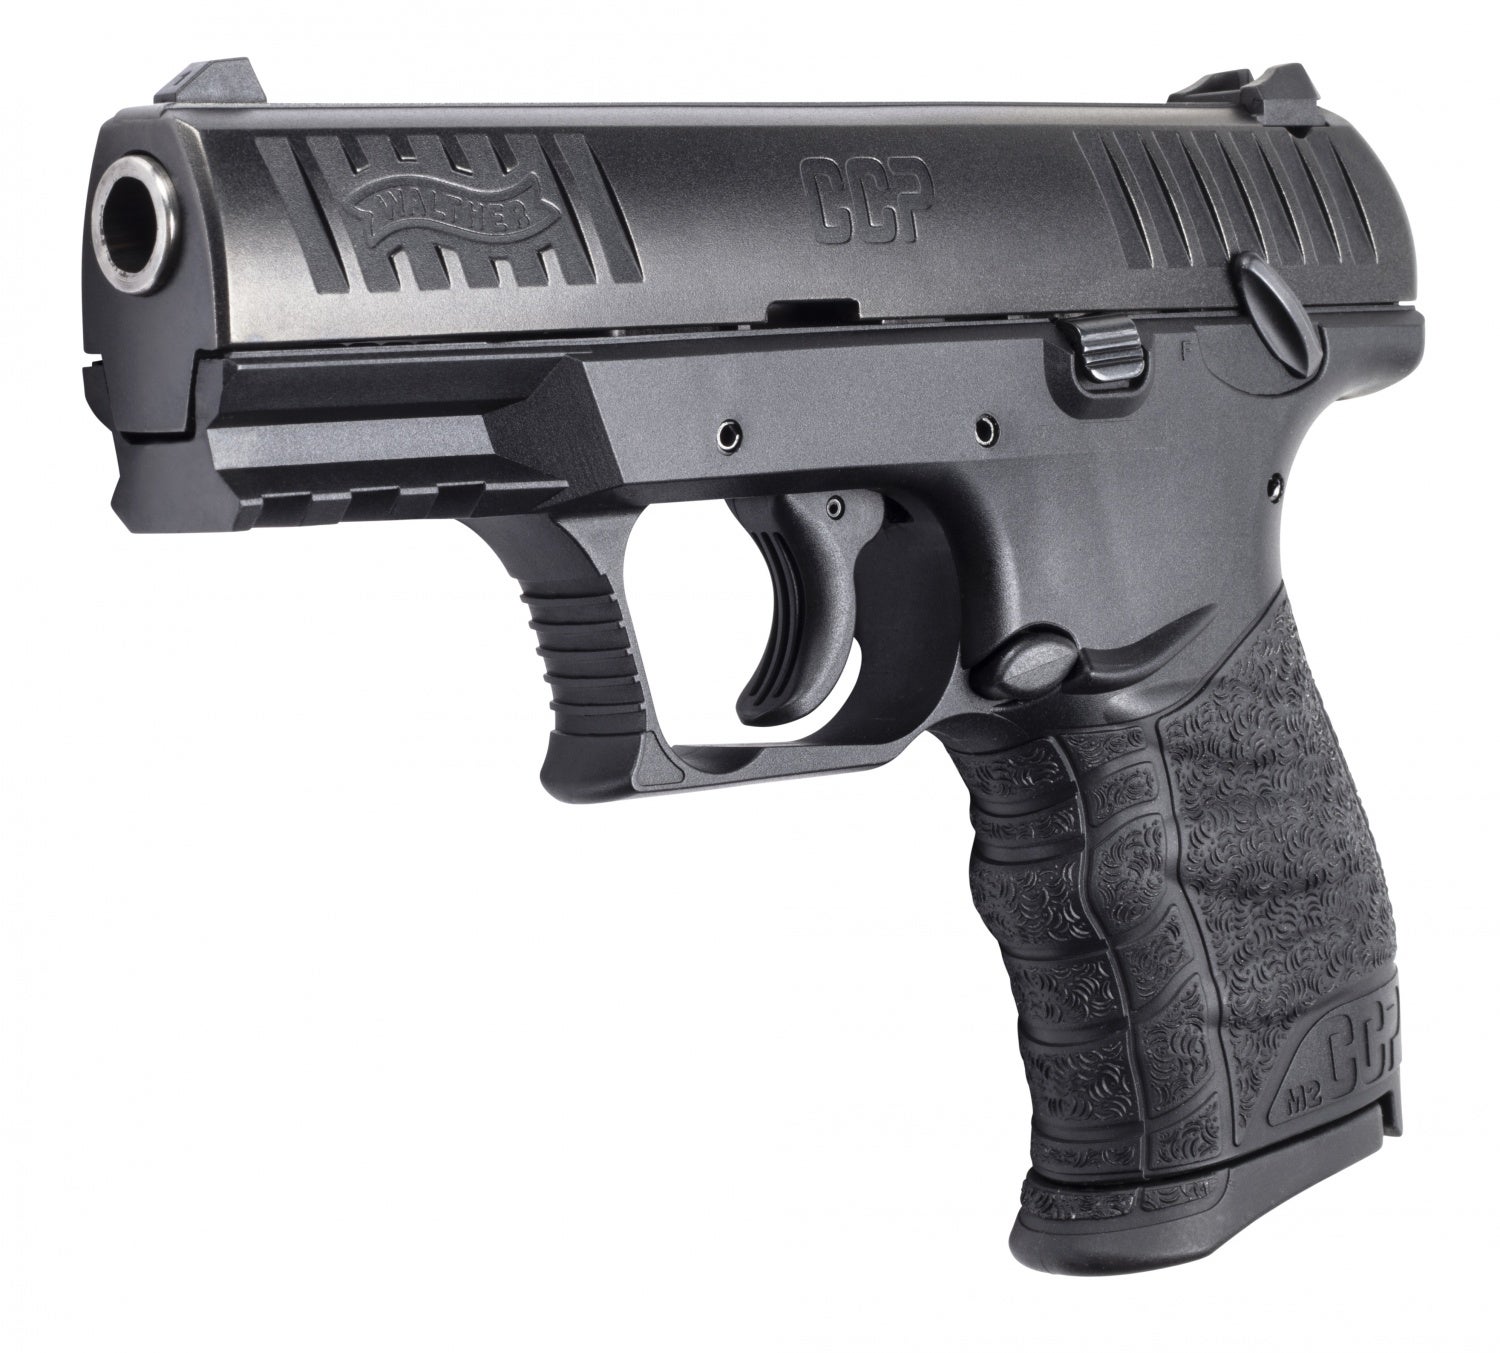 Walther CCP M2 Semi-Automatic Pistol For Sale | In stock Now, Don't Miss Out! - Tactical Firearms And Archery